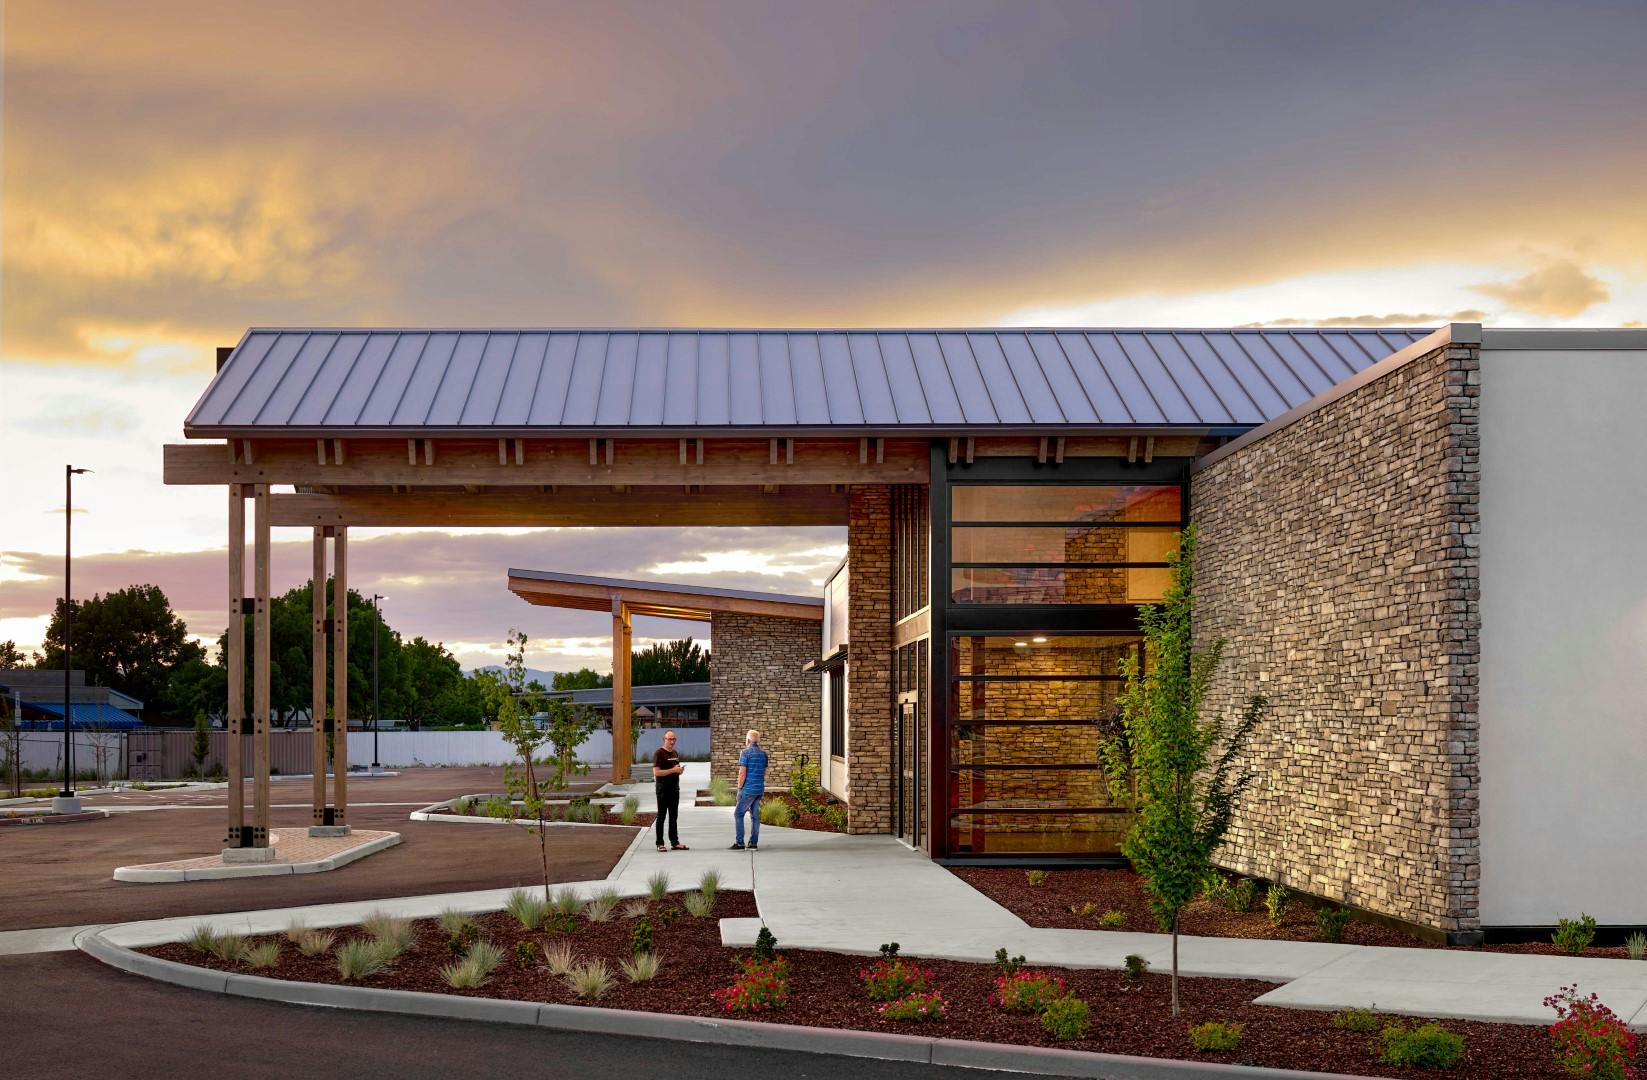 Side exterior of the OOC ambulatory surgery center during sunset. Two people are having a conversation under the canopy for patient drop-off.